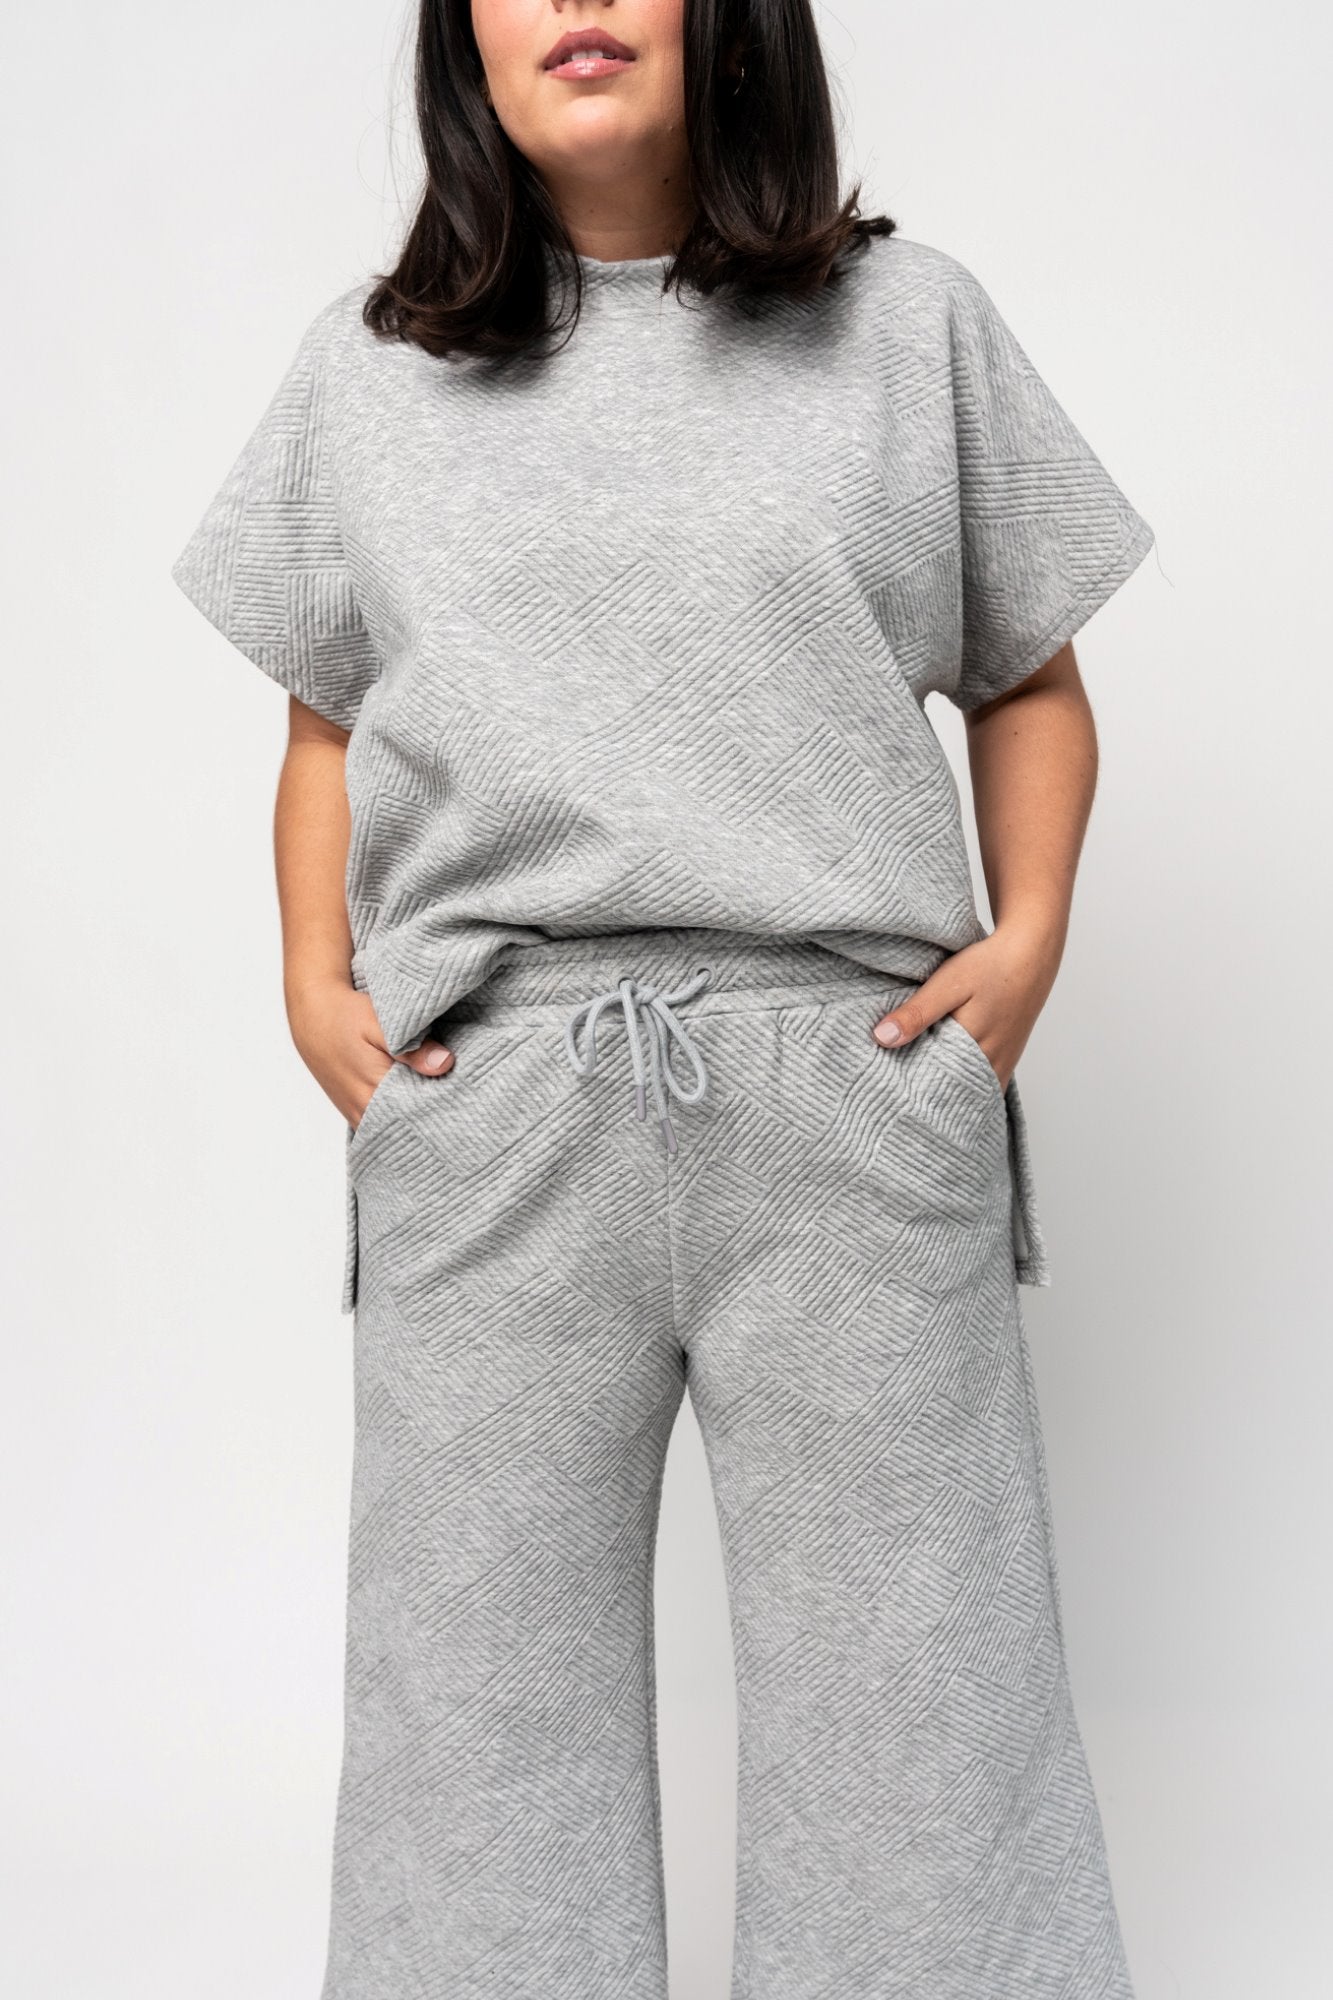 Addison Top in Grey (Small-3XL) Holley Girl 